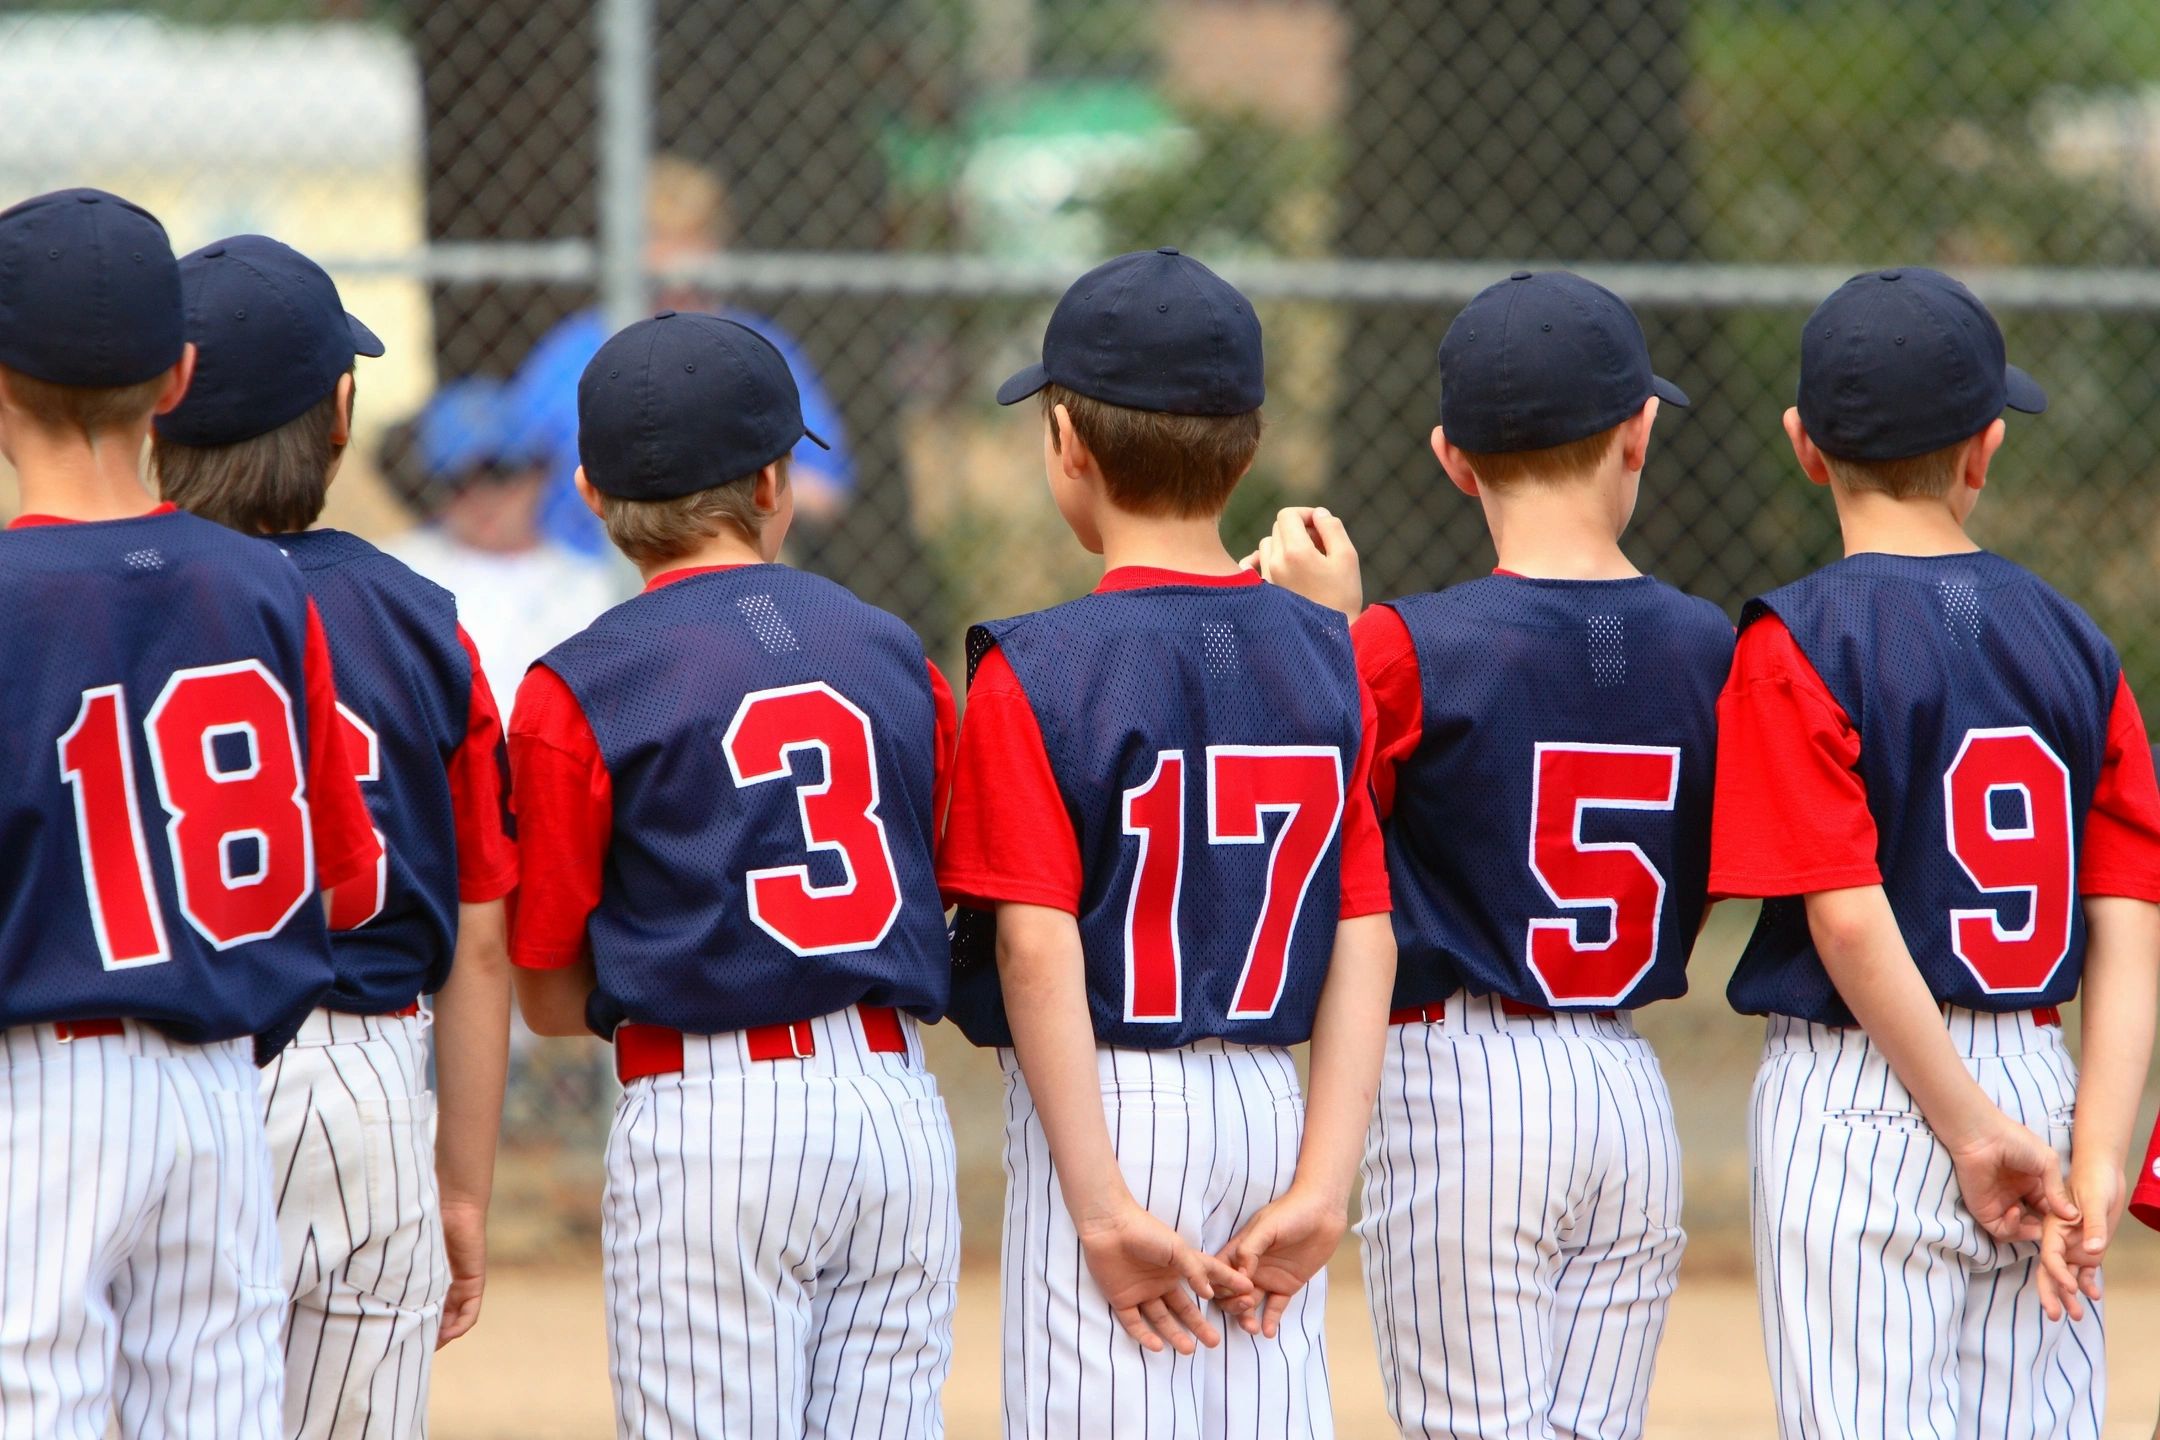 What You Need to Know About Using Little League® Trademarks - Little League